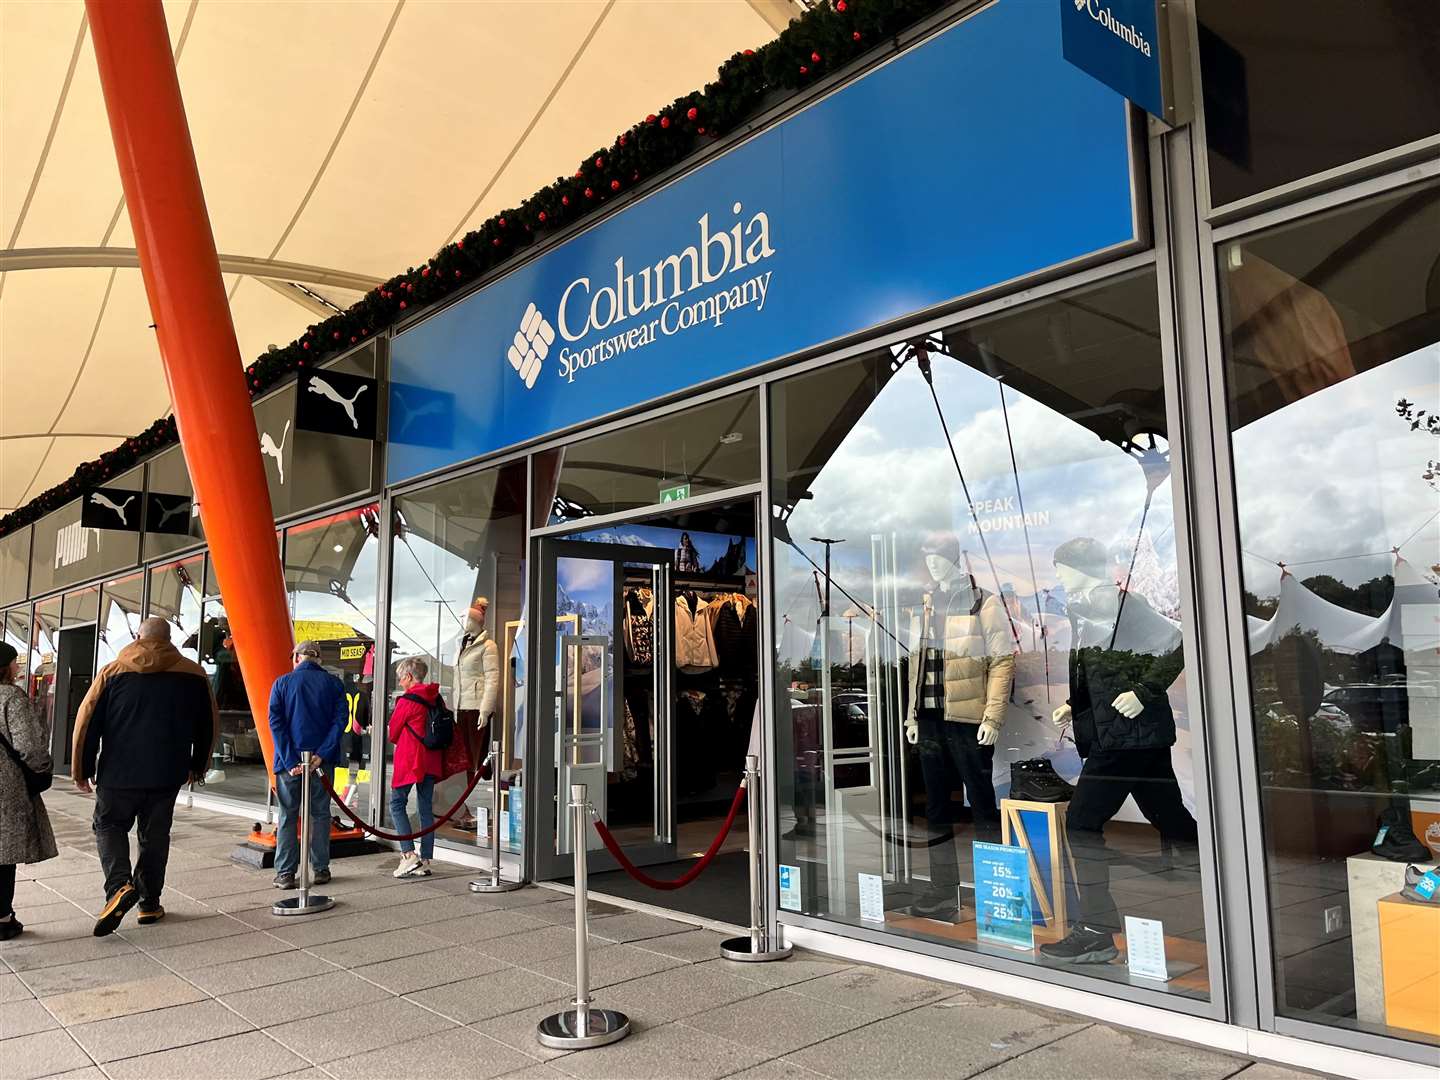 Columbia opened on Thursday, October 19